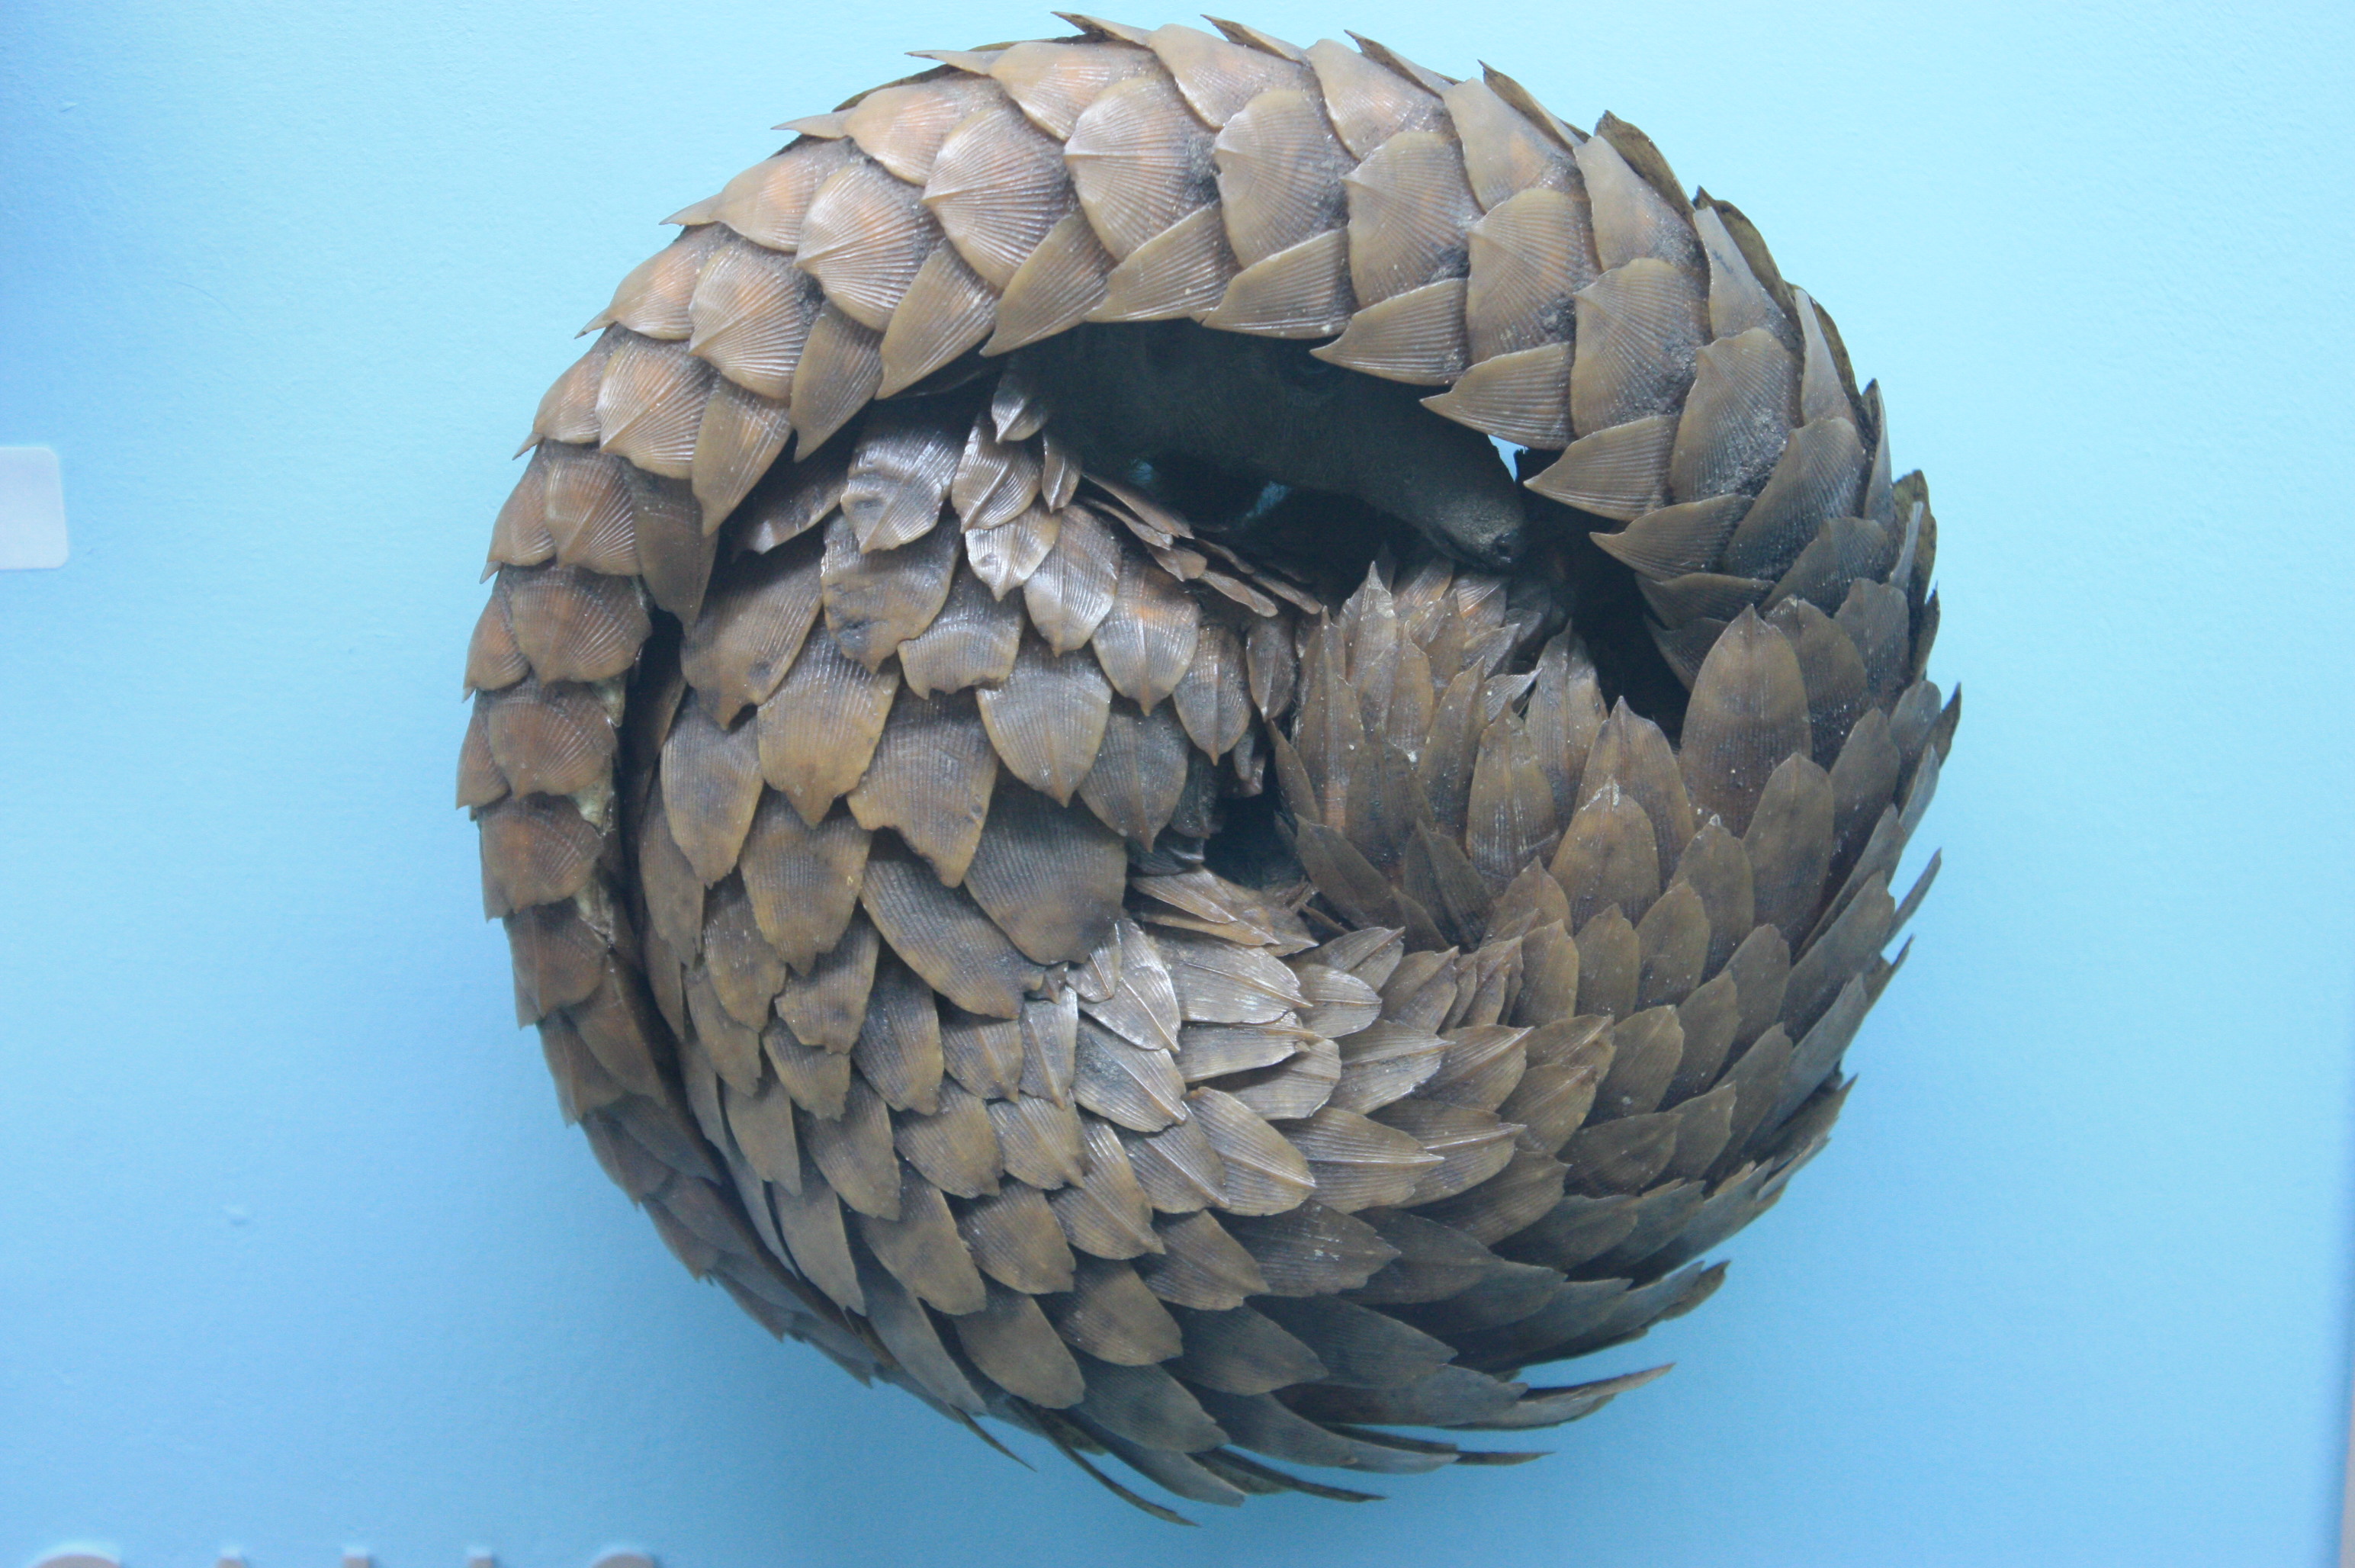 A pangolin in defensive pose